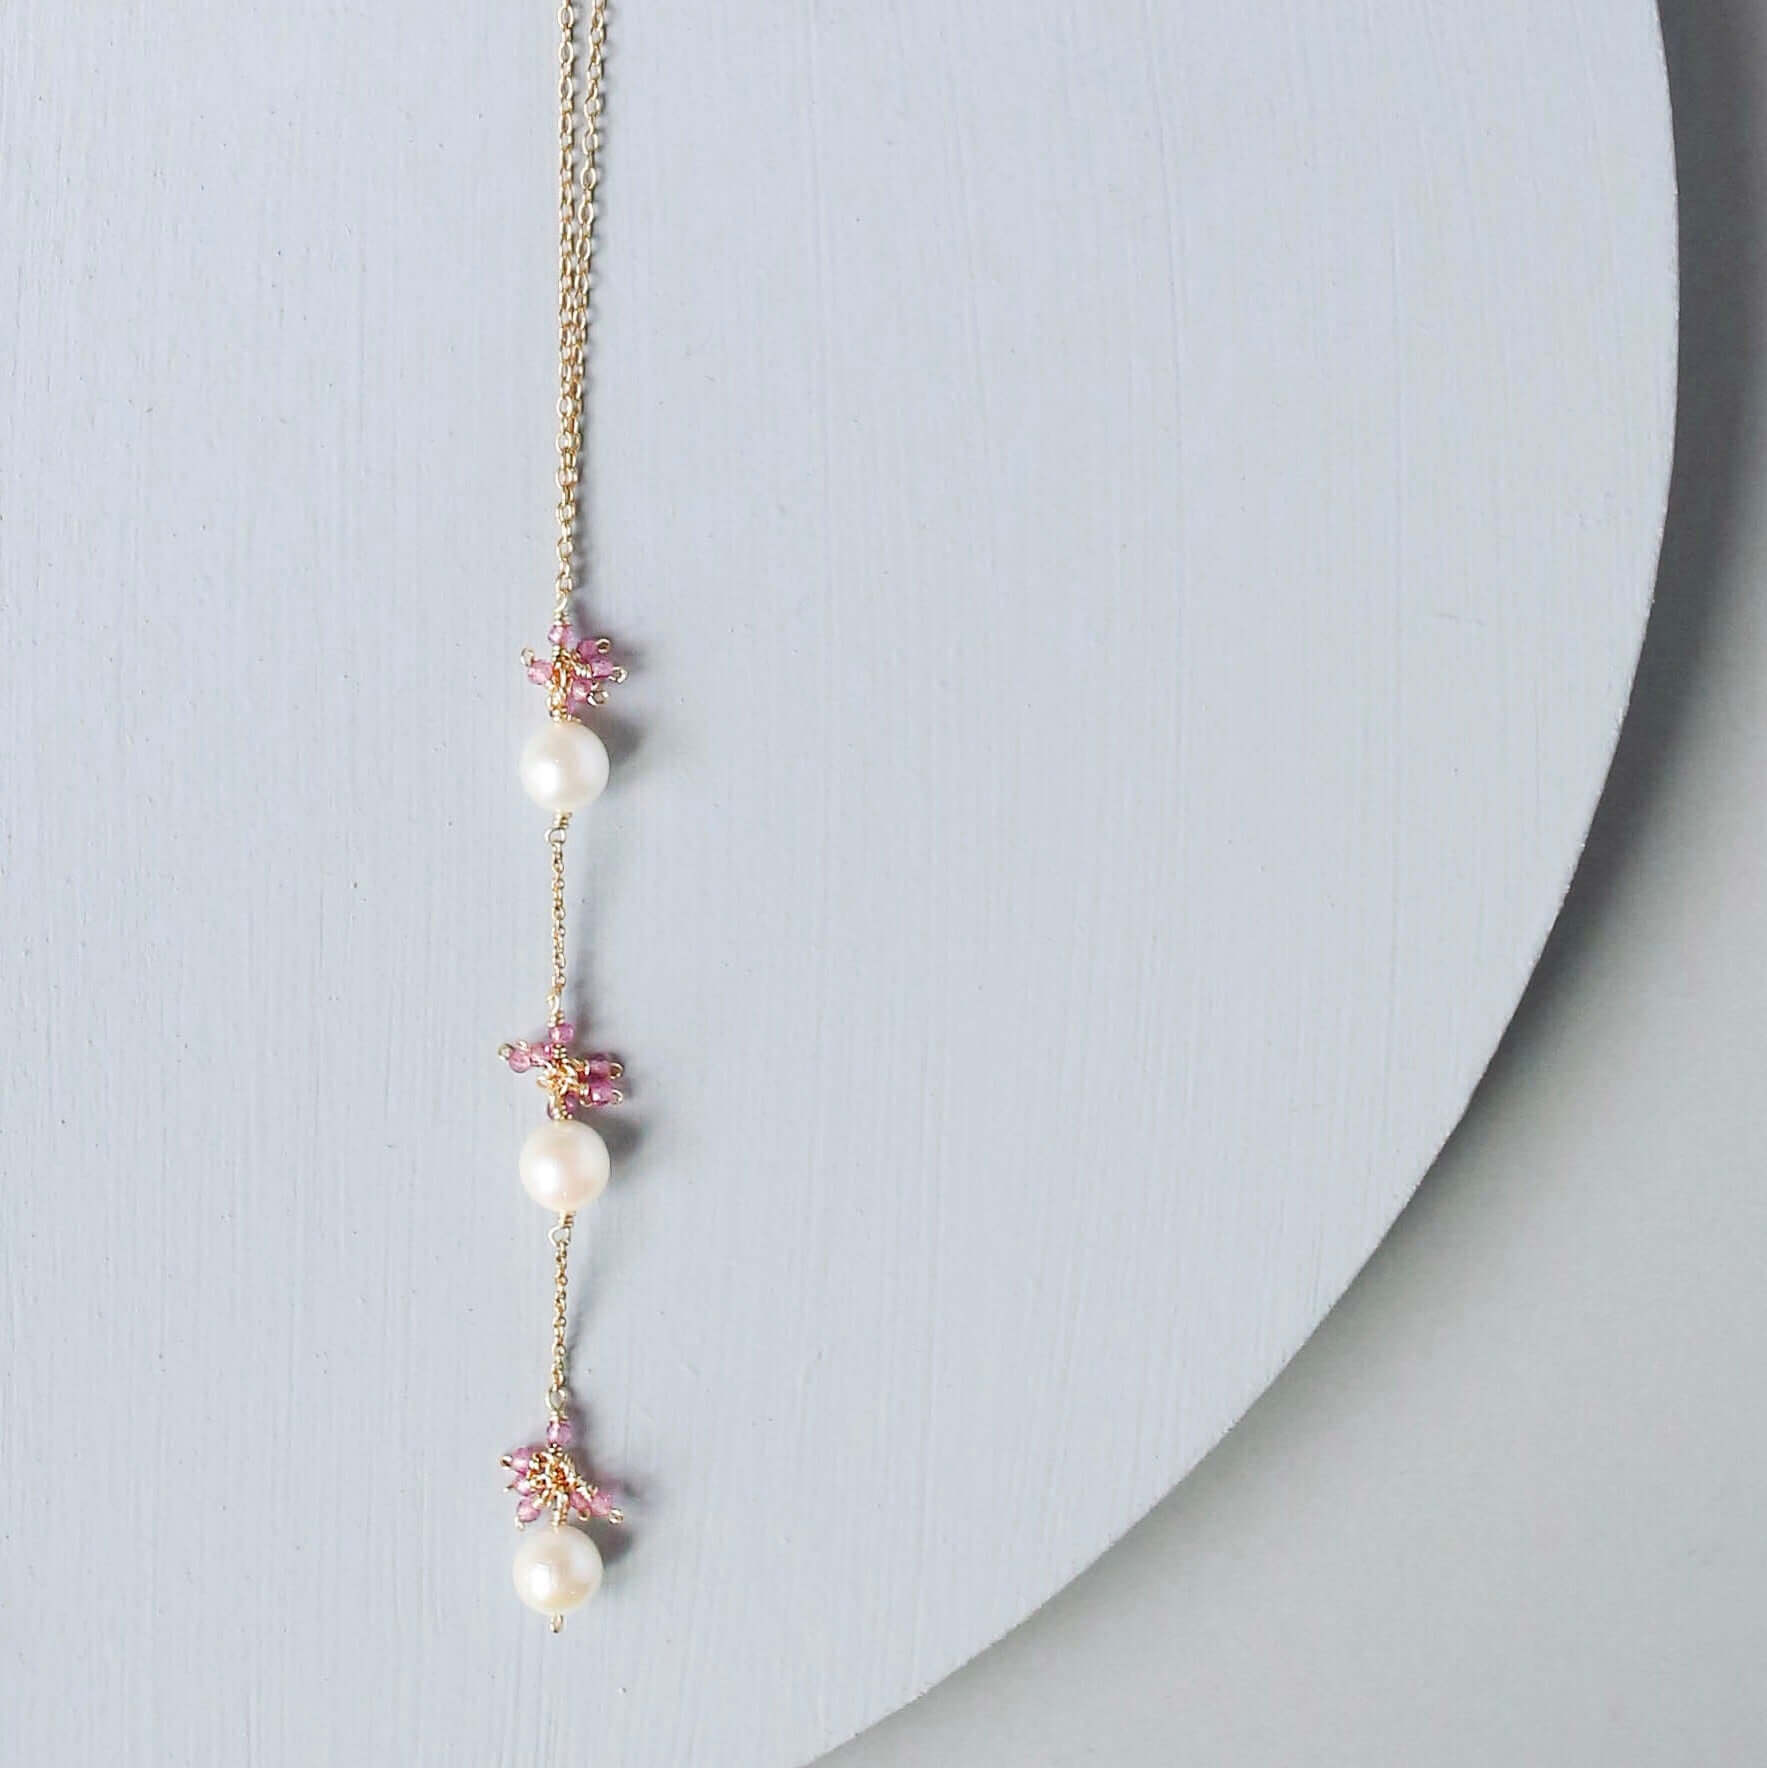 Gold plated Necklace with 3 white freshwater bead pearls paired with genuine pink Tourmaline quartz gemstones